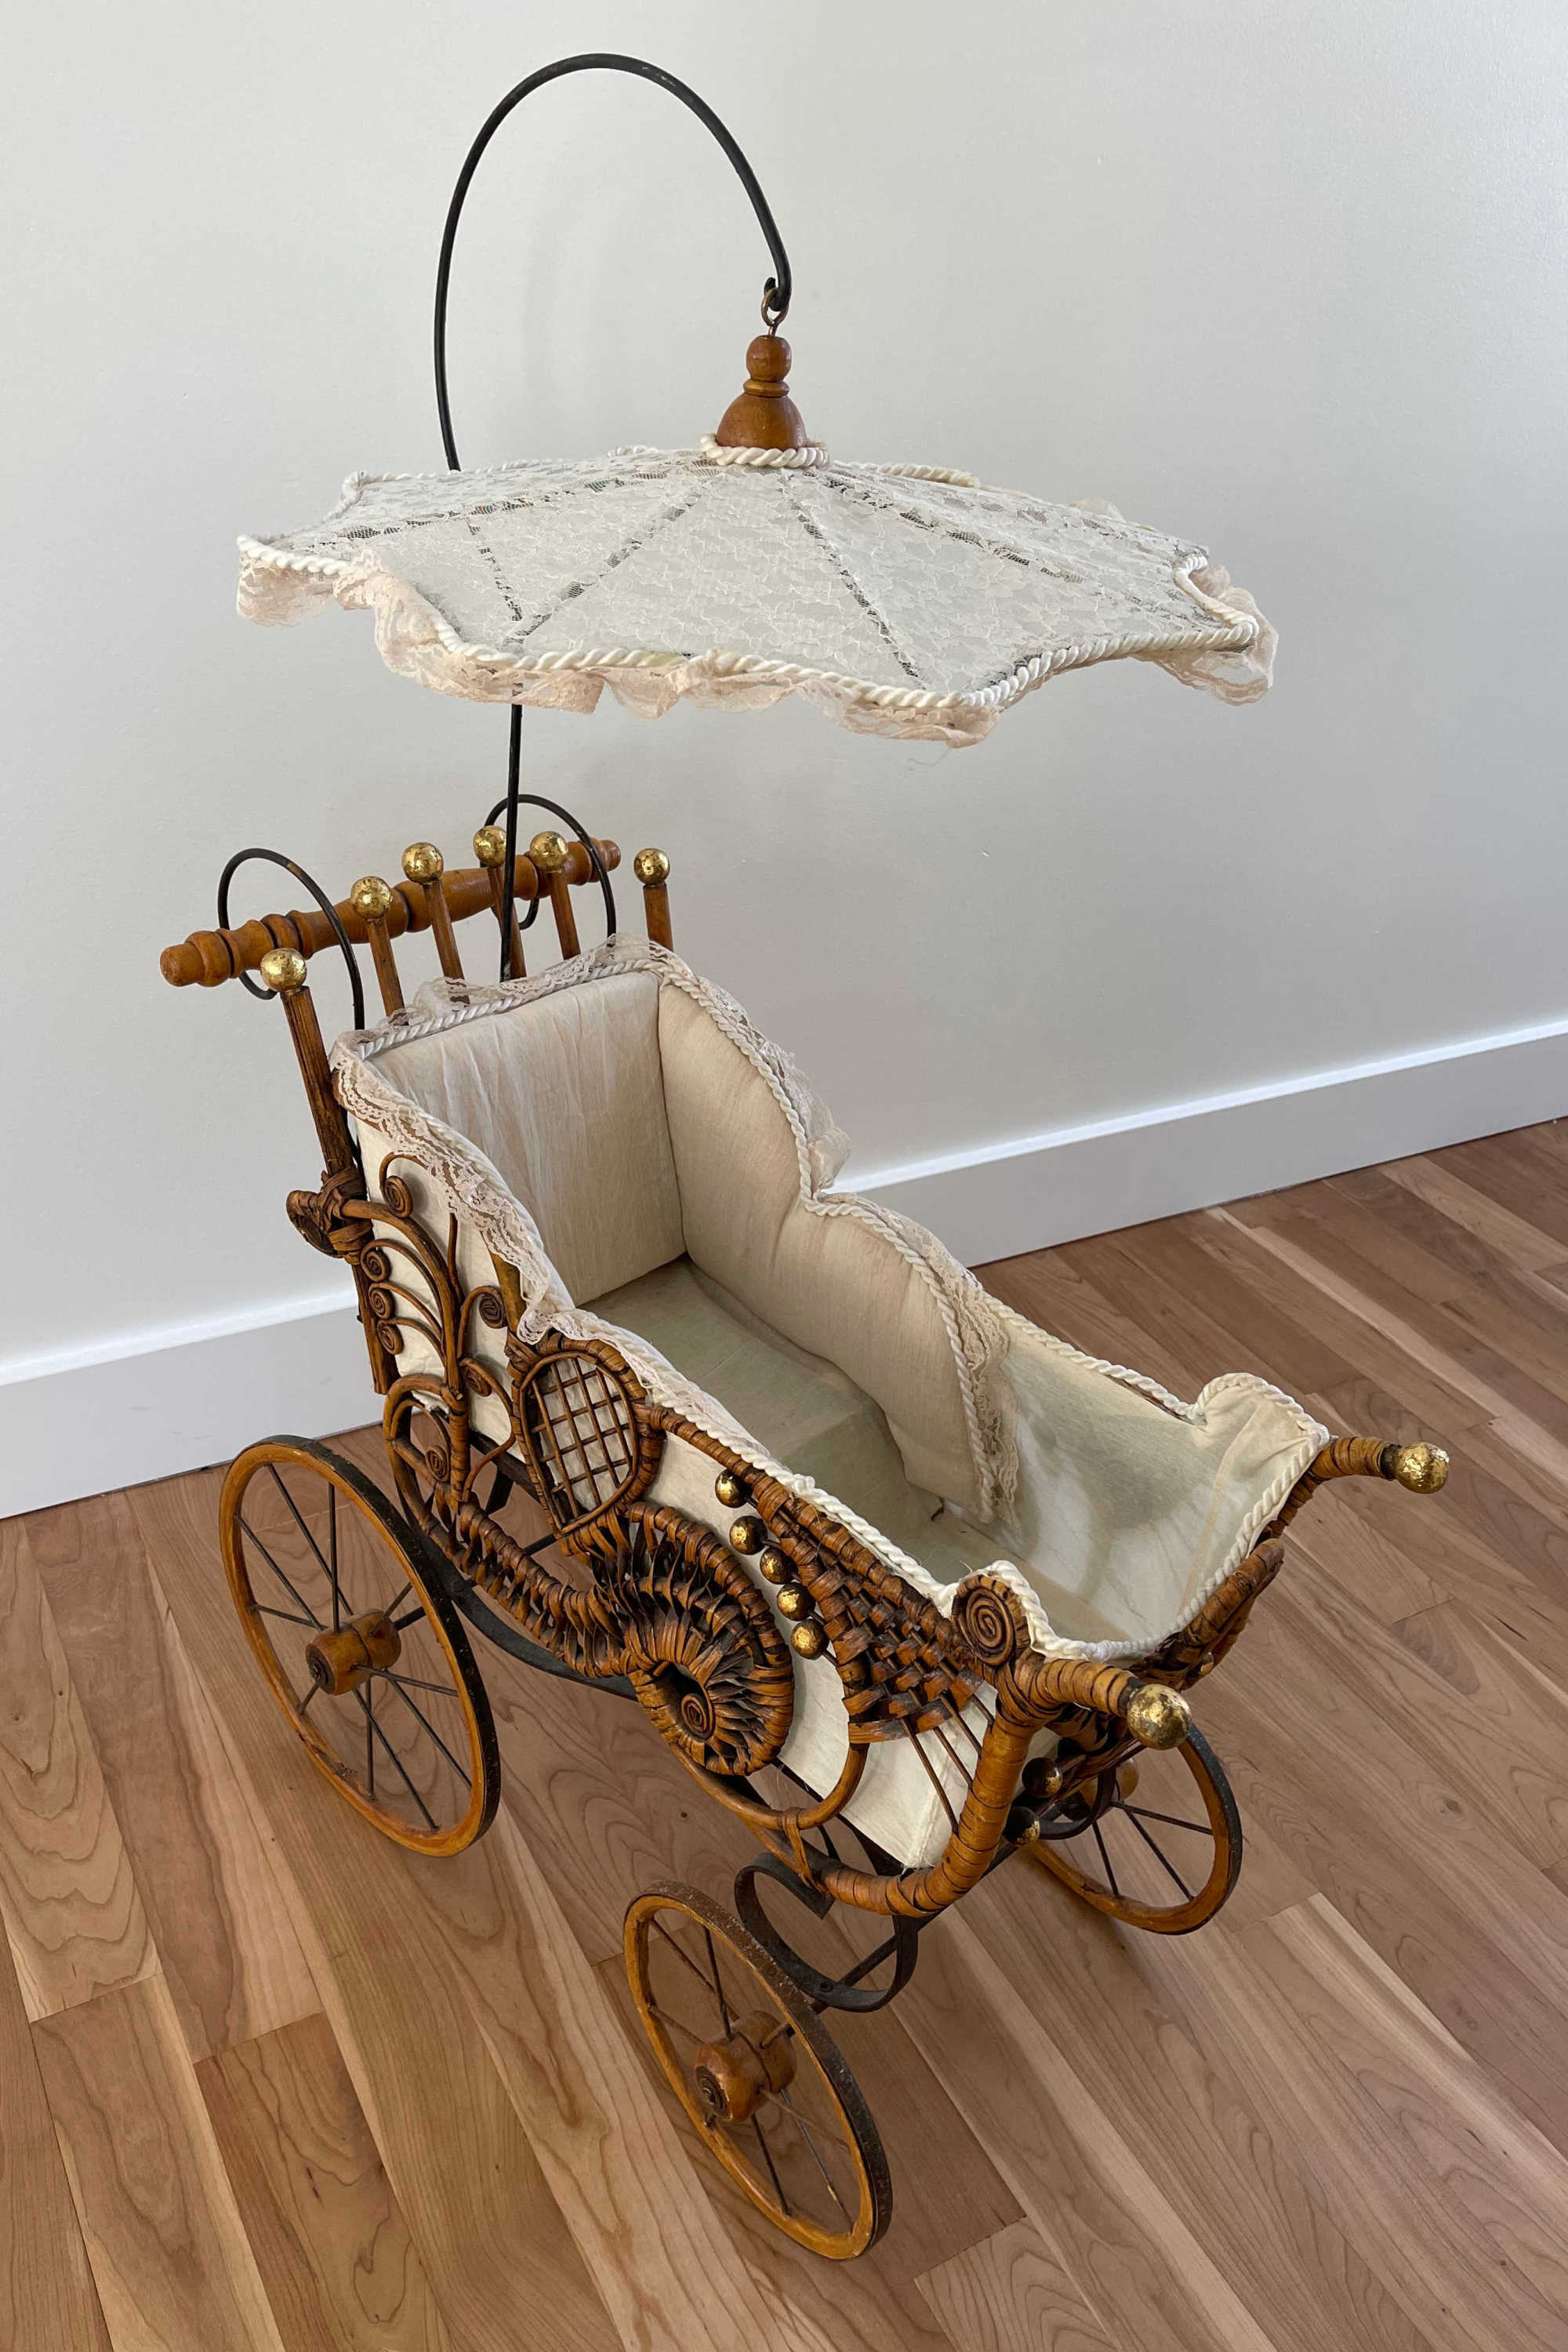 Collectible Baby Carriages & Buggies for sale